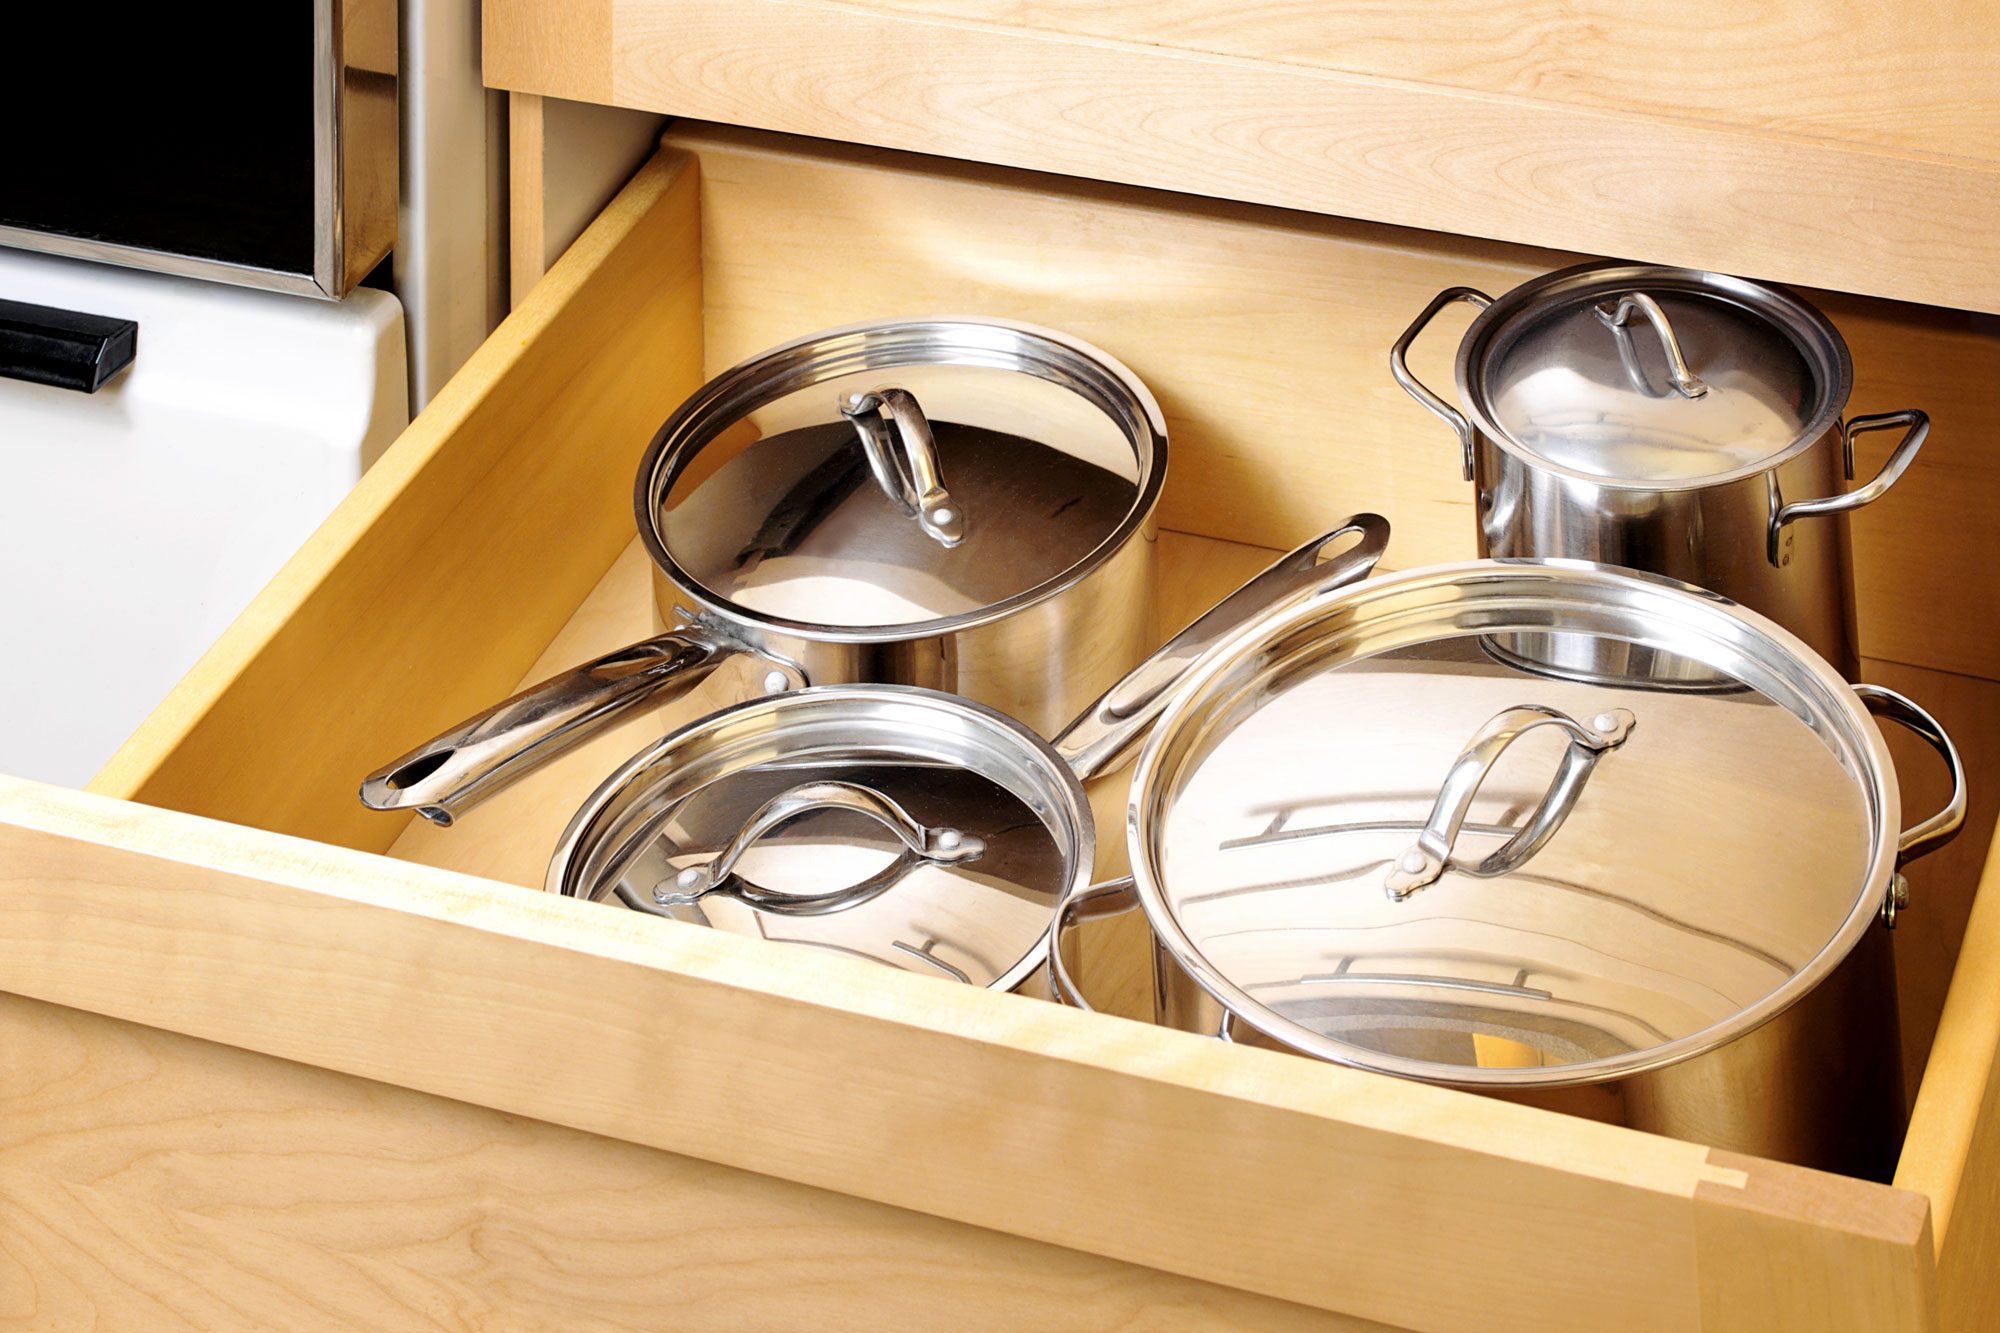 30 Kitchen Pots And Pans Storage Solutions in 2023